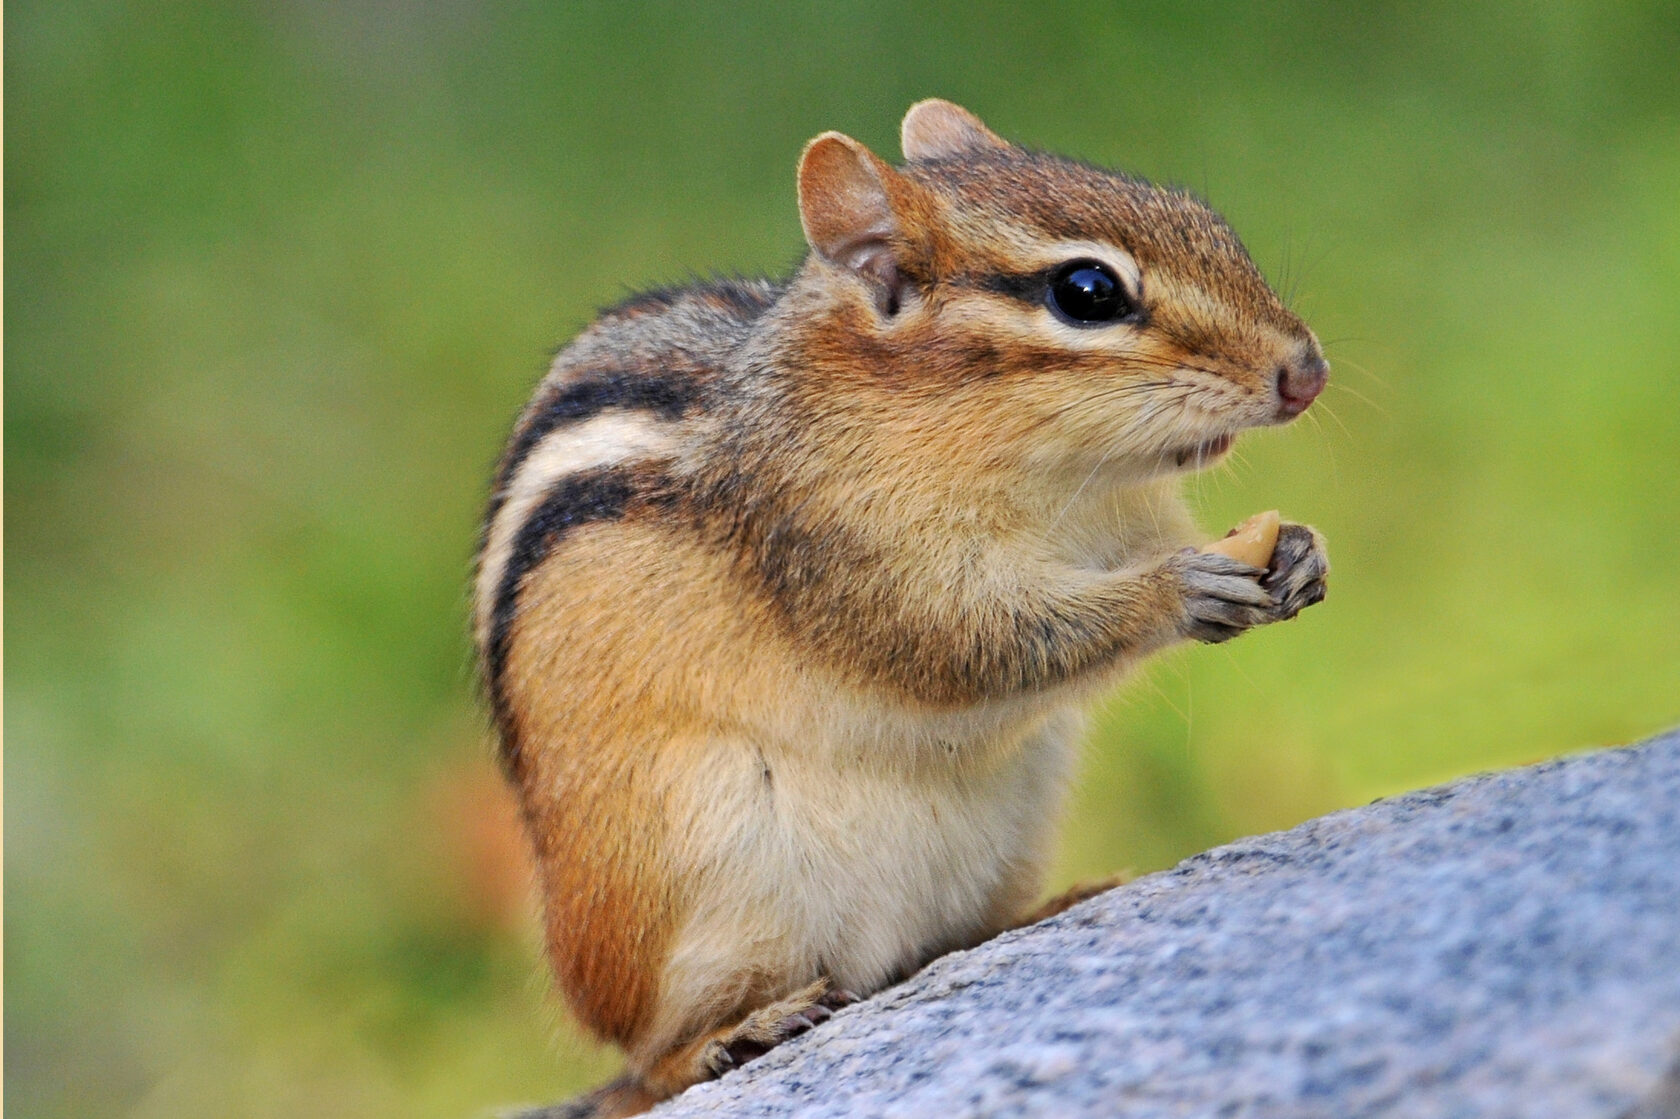 Profile of a chipmunk with a nut in its front paws.